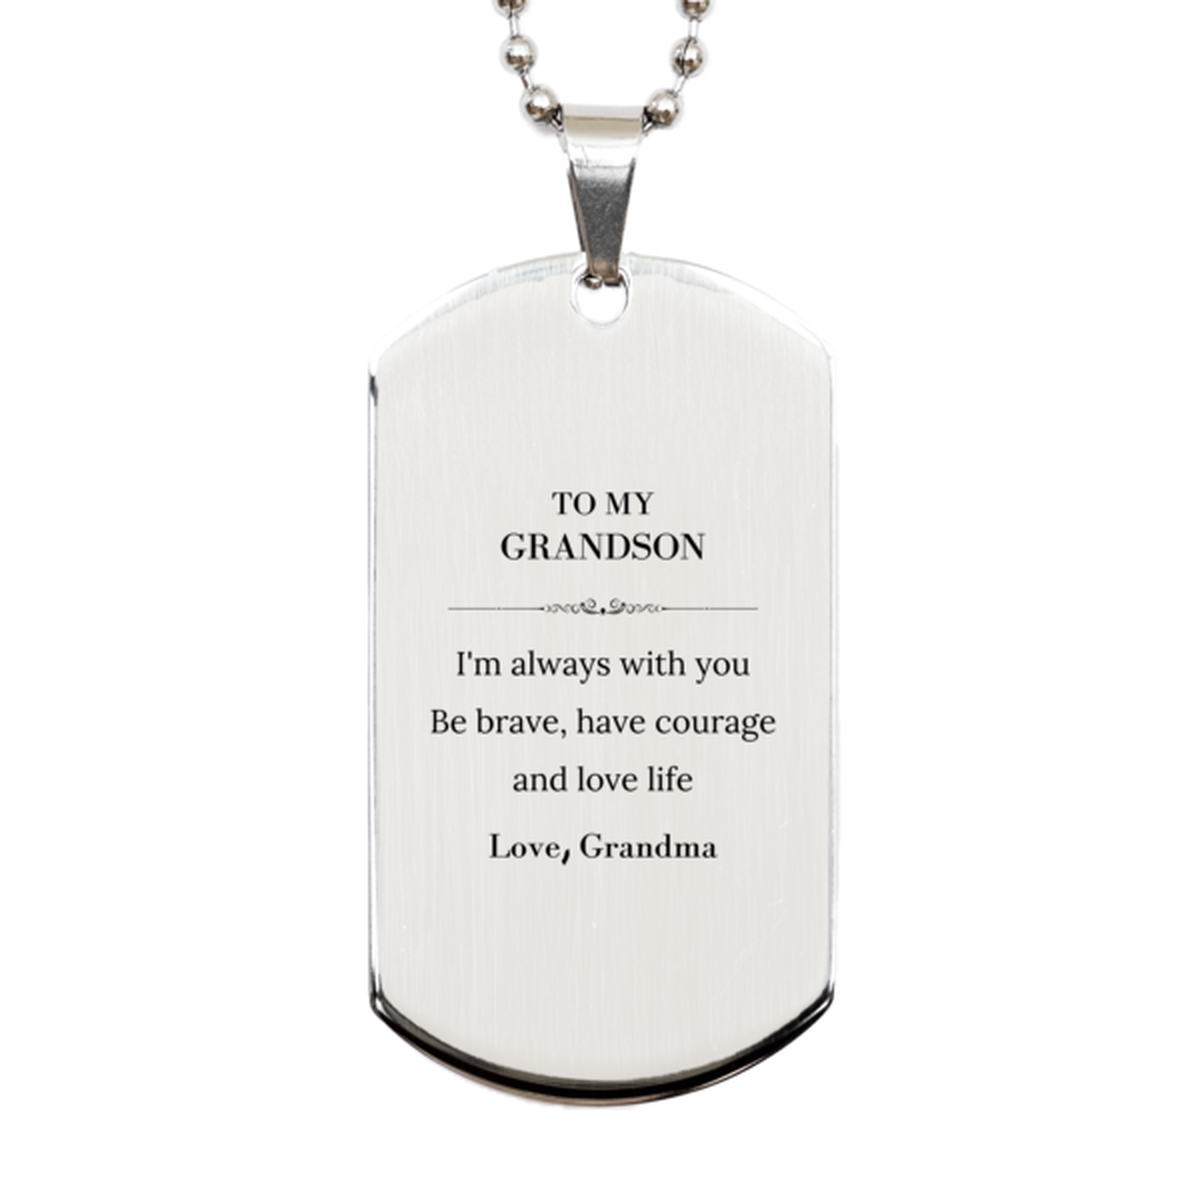 To My Grandson Gifts from Grandma, Unique Silver Dog Tag Inspirational Christmas Birthday Graduation Gifts for Grandson I'm always with you. Be brave, have courage and love life. Love, Grandma